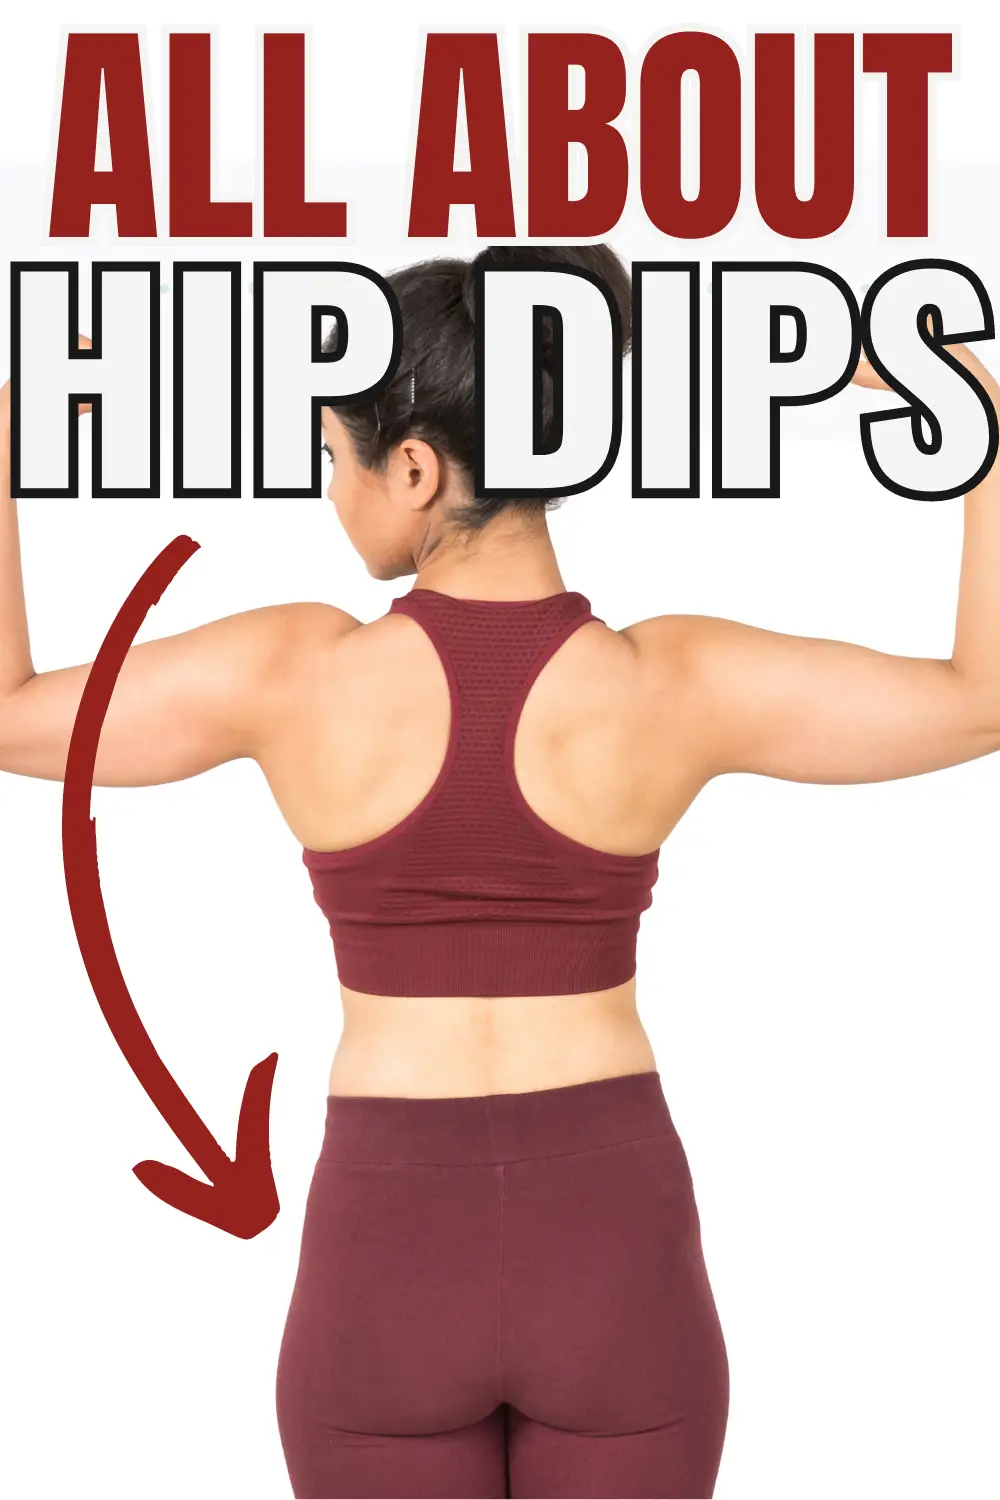 All about hip dips